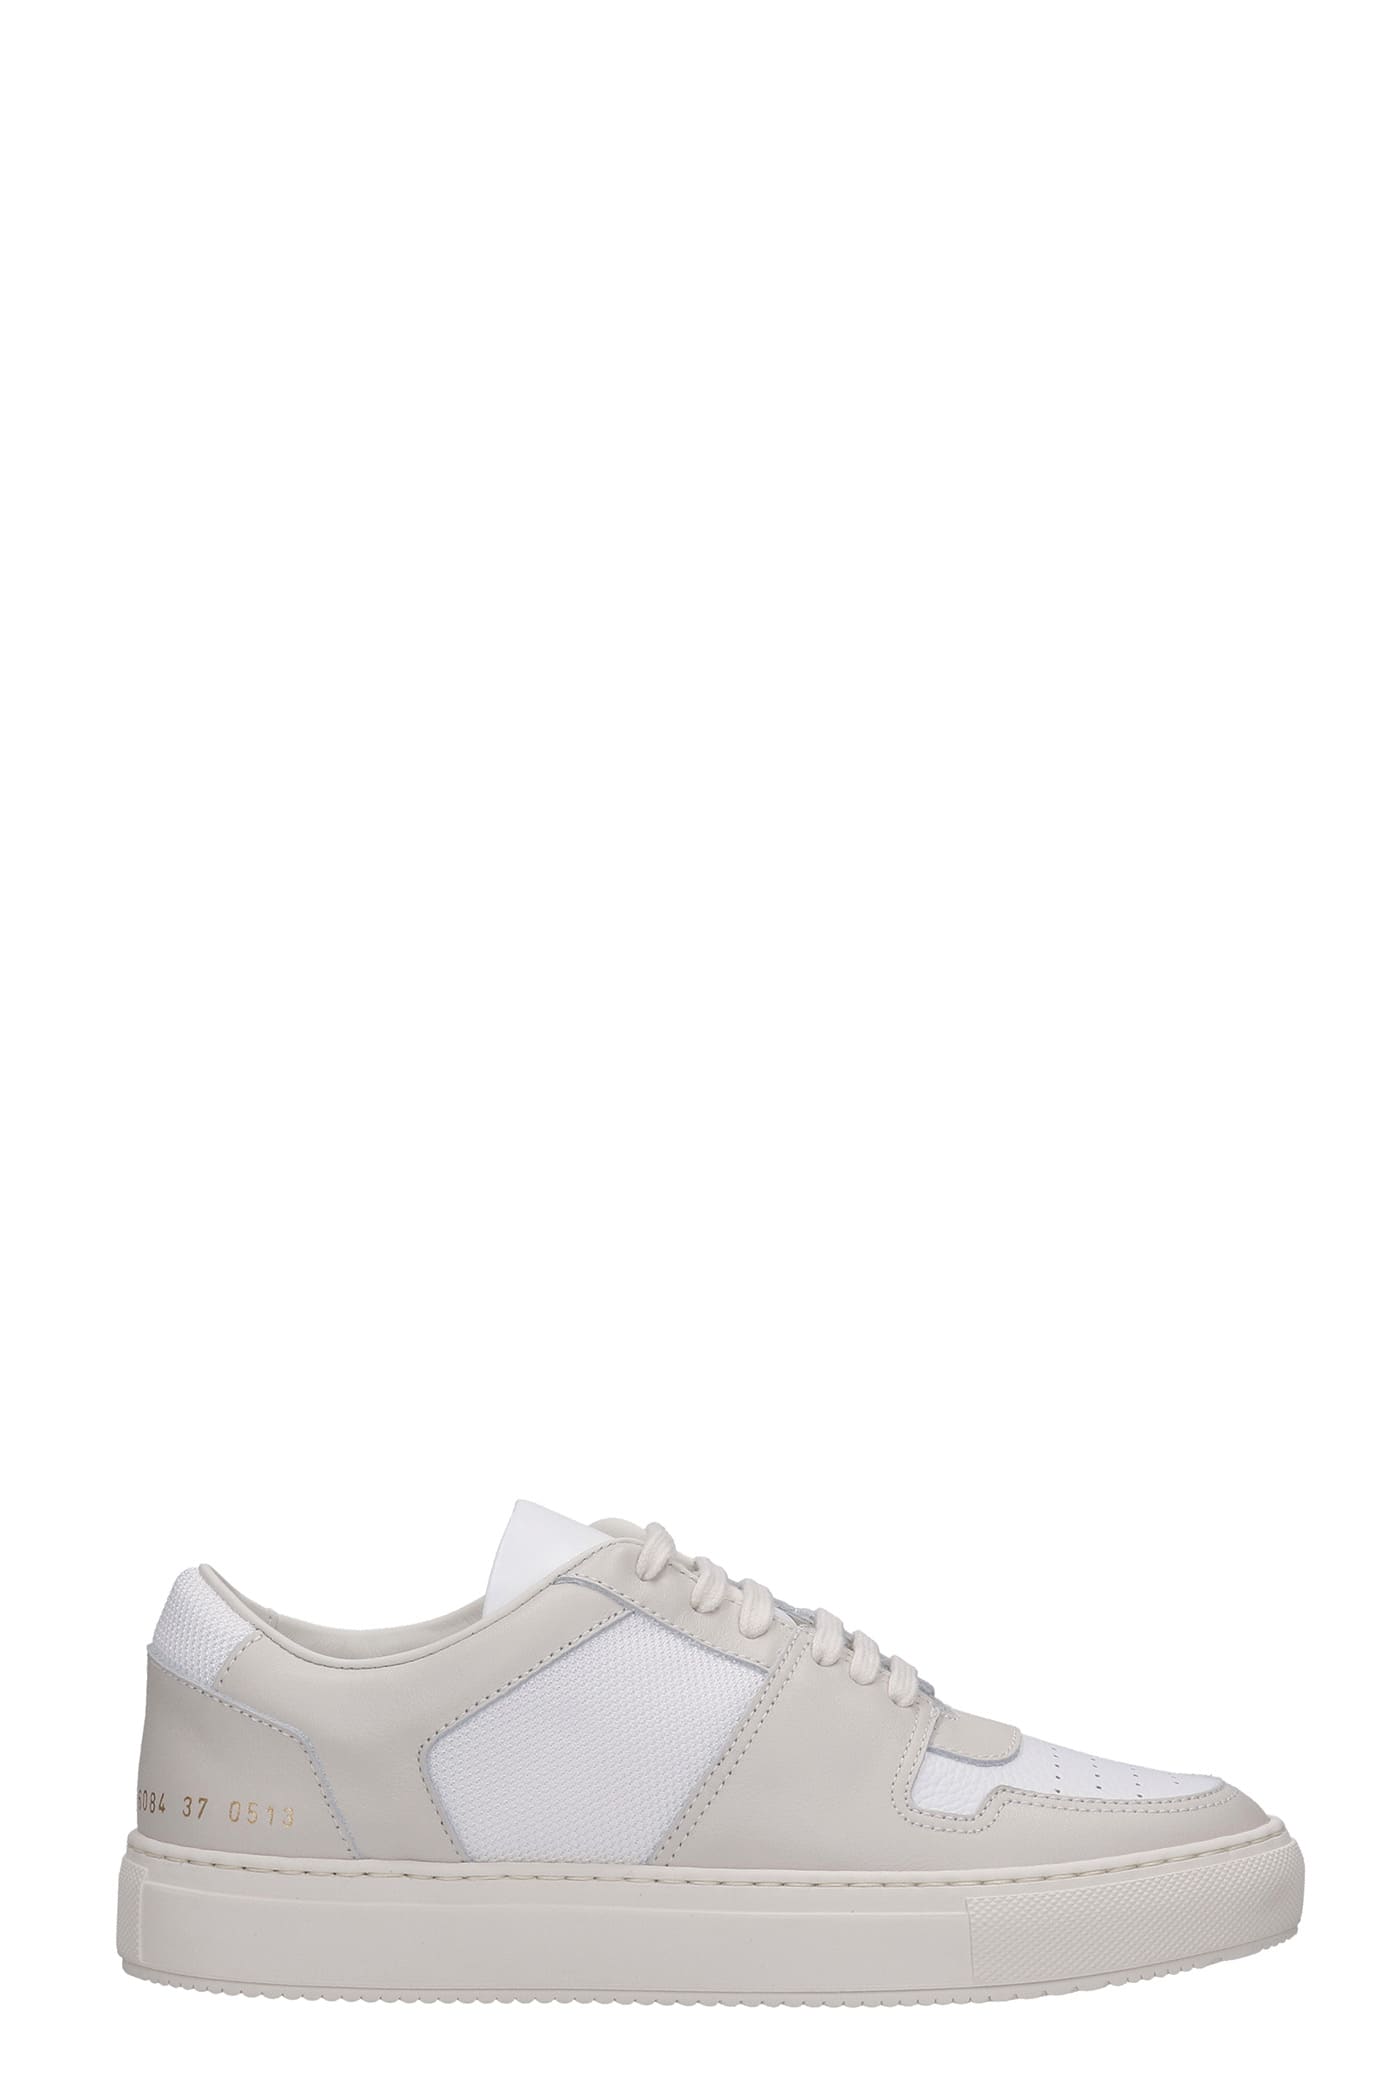 Common Projects Decades Low Sneakers In White Leather And Fabric